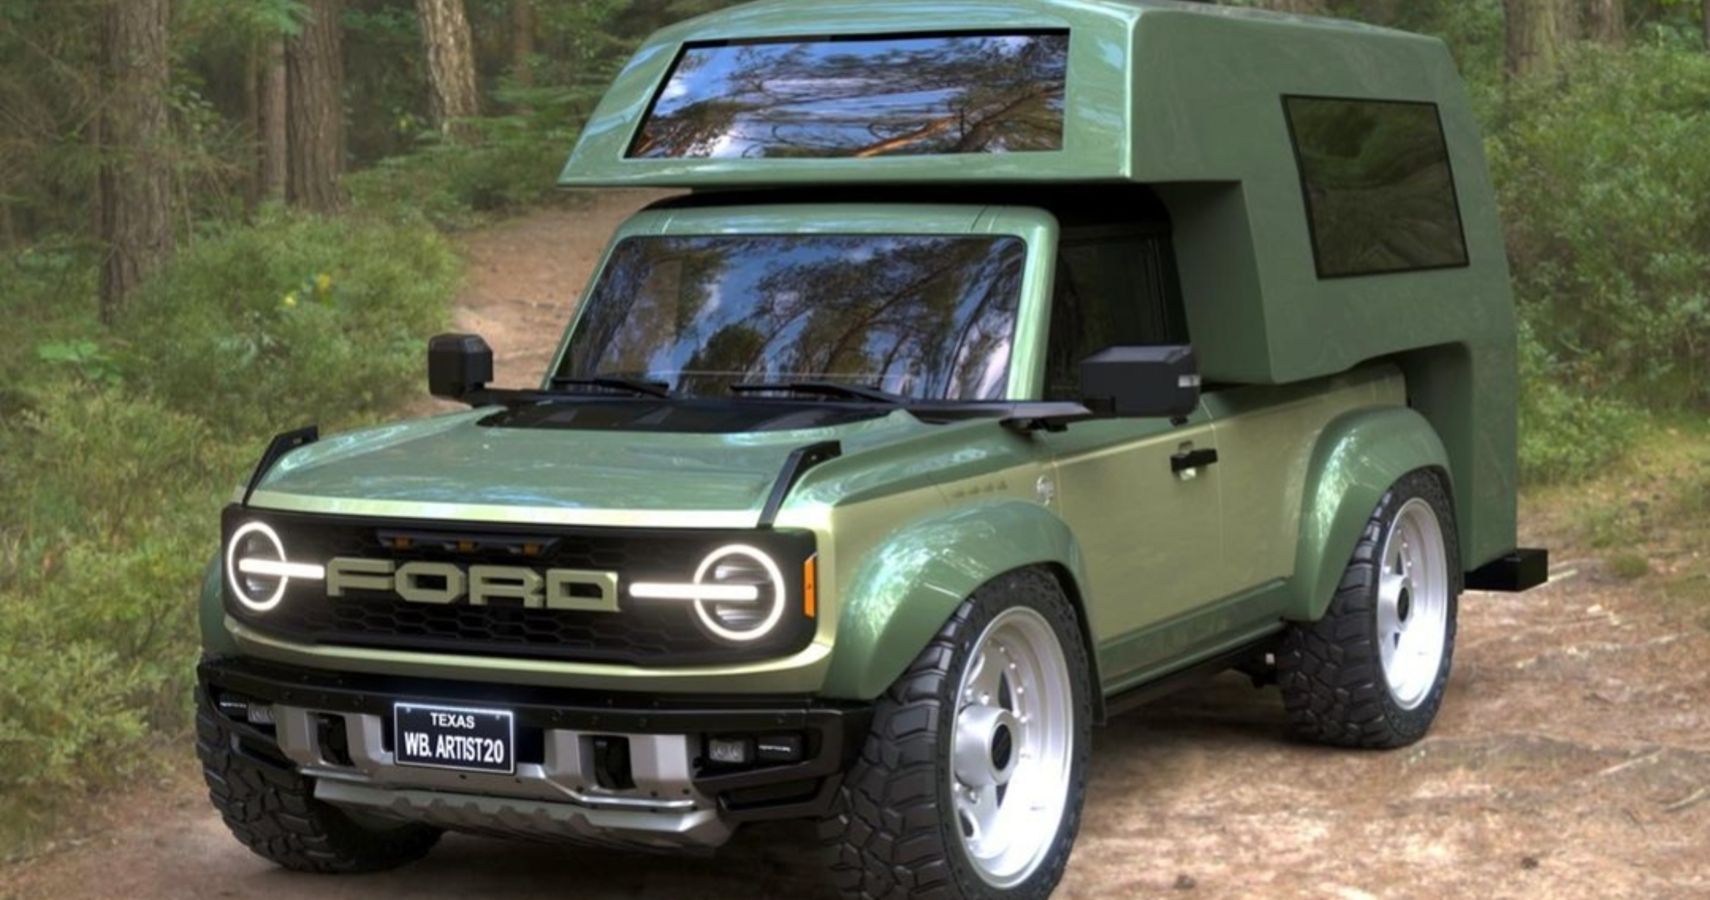 This Ford Bronco Raptor Camper Concept Is A Tiny Home With Style And